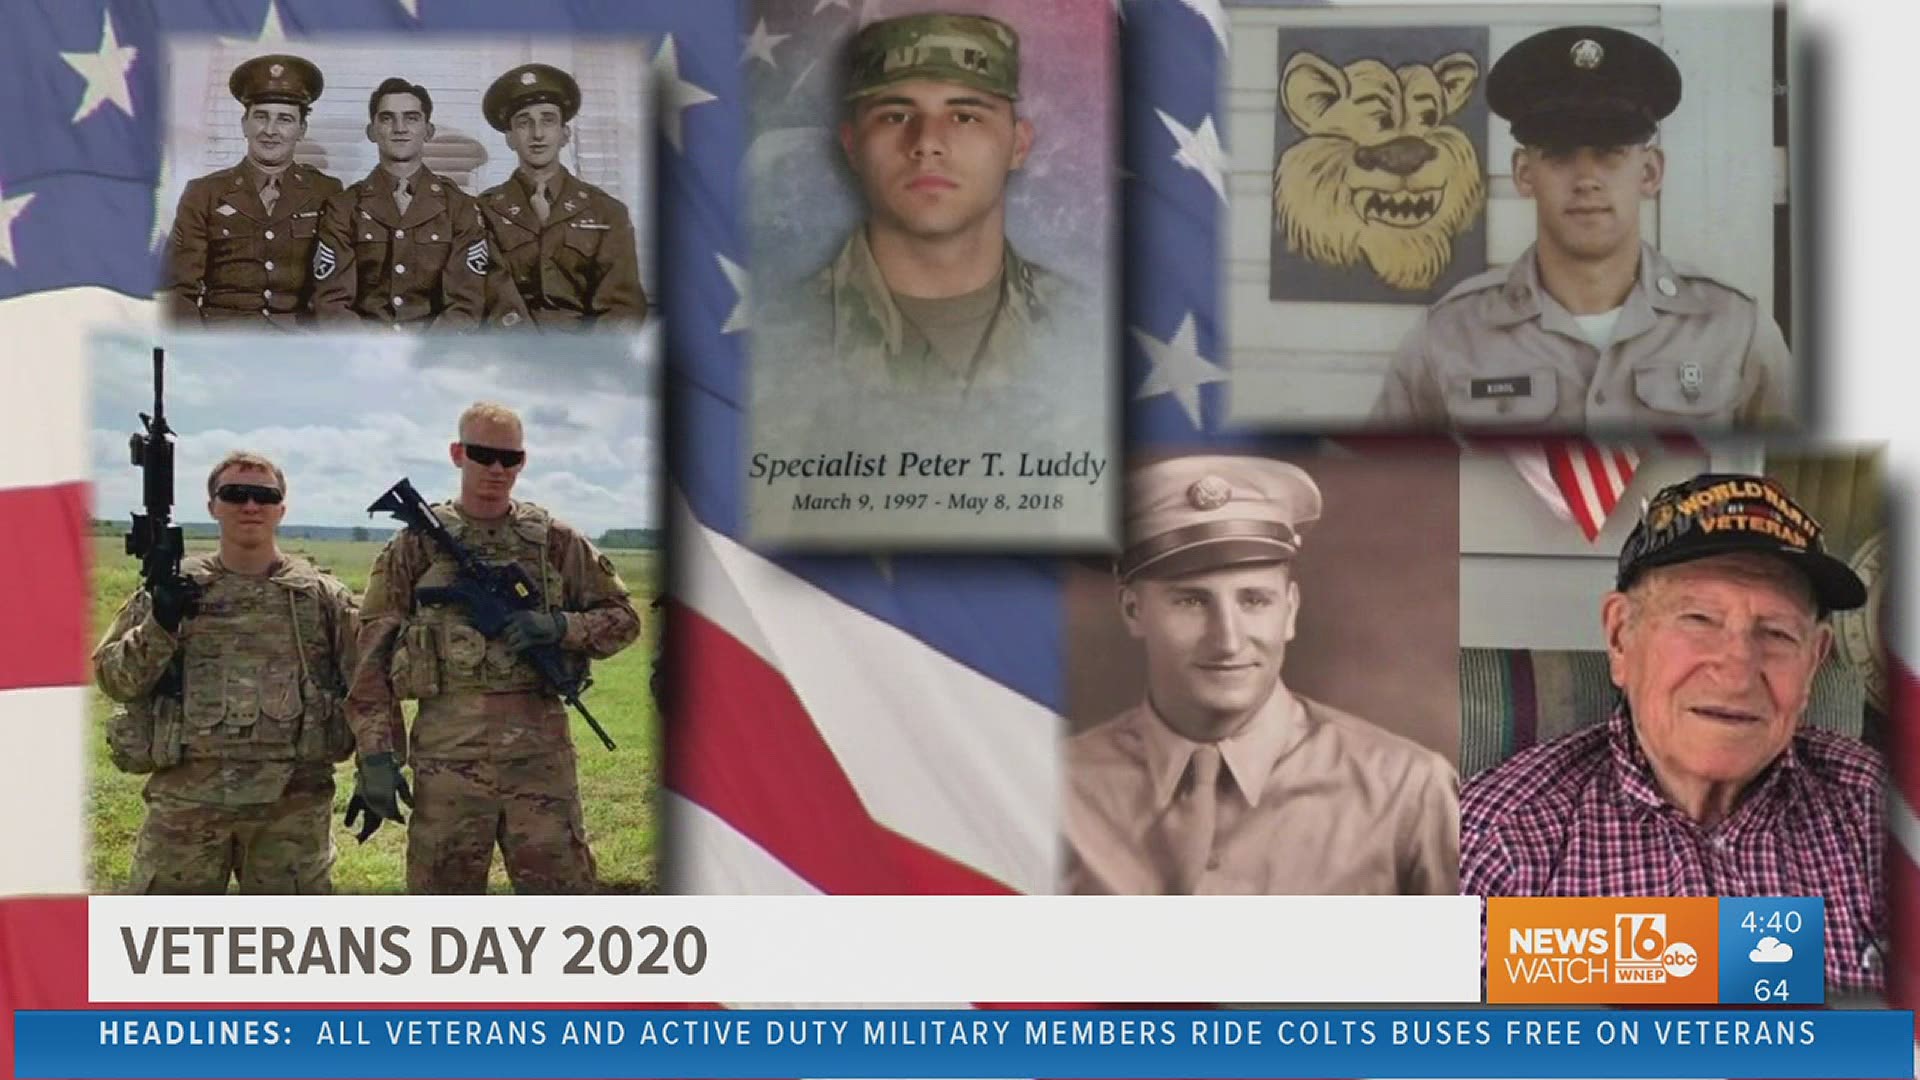 Newswatch 16 talked with two vets from central PA on what Veterans Day means to them and how it's changed a bit during COVID-19.